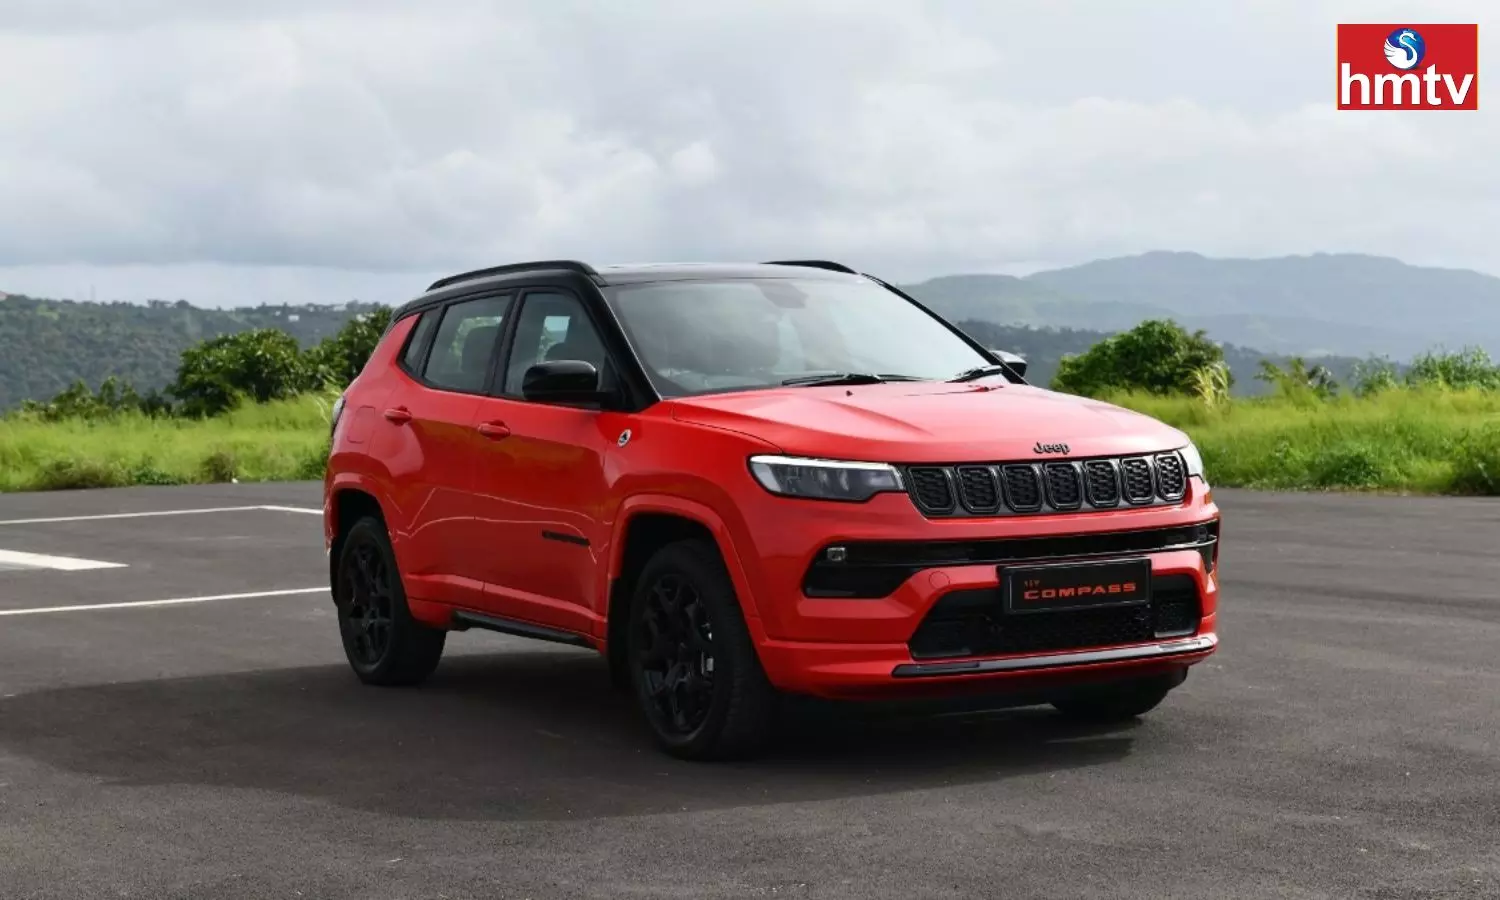 Jeep Motors Launched The New Compass SUV Check Price and Specifications